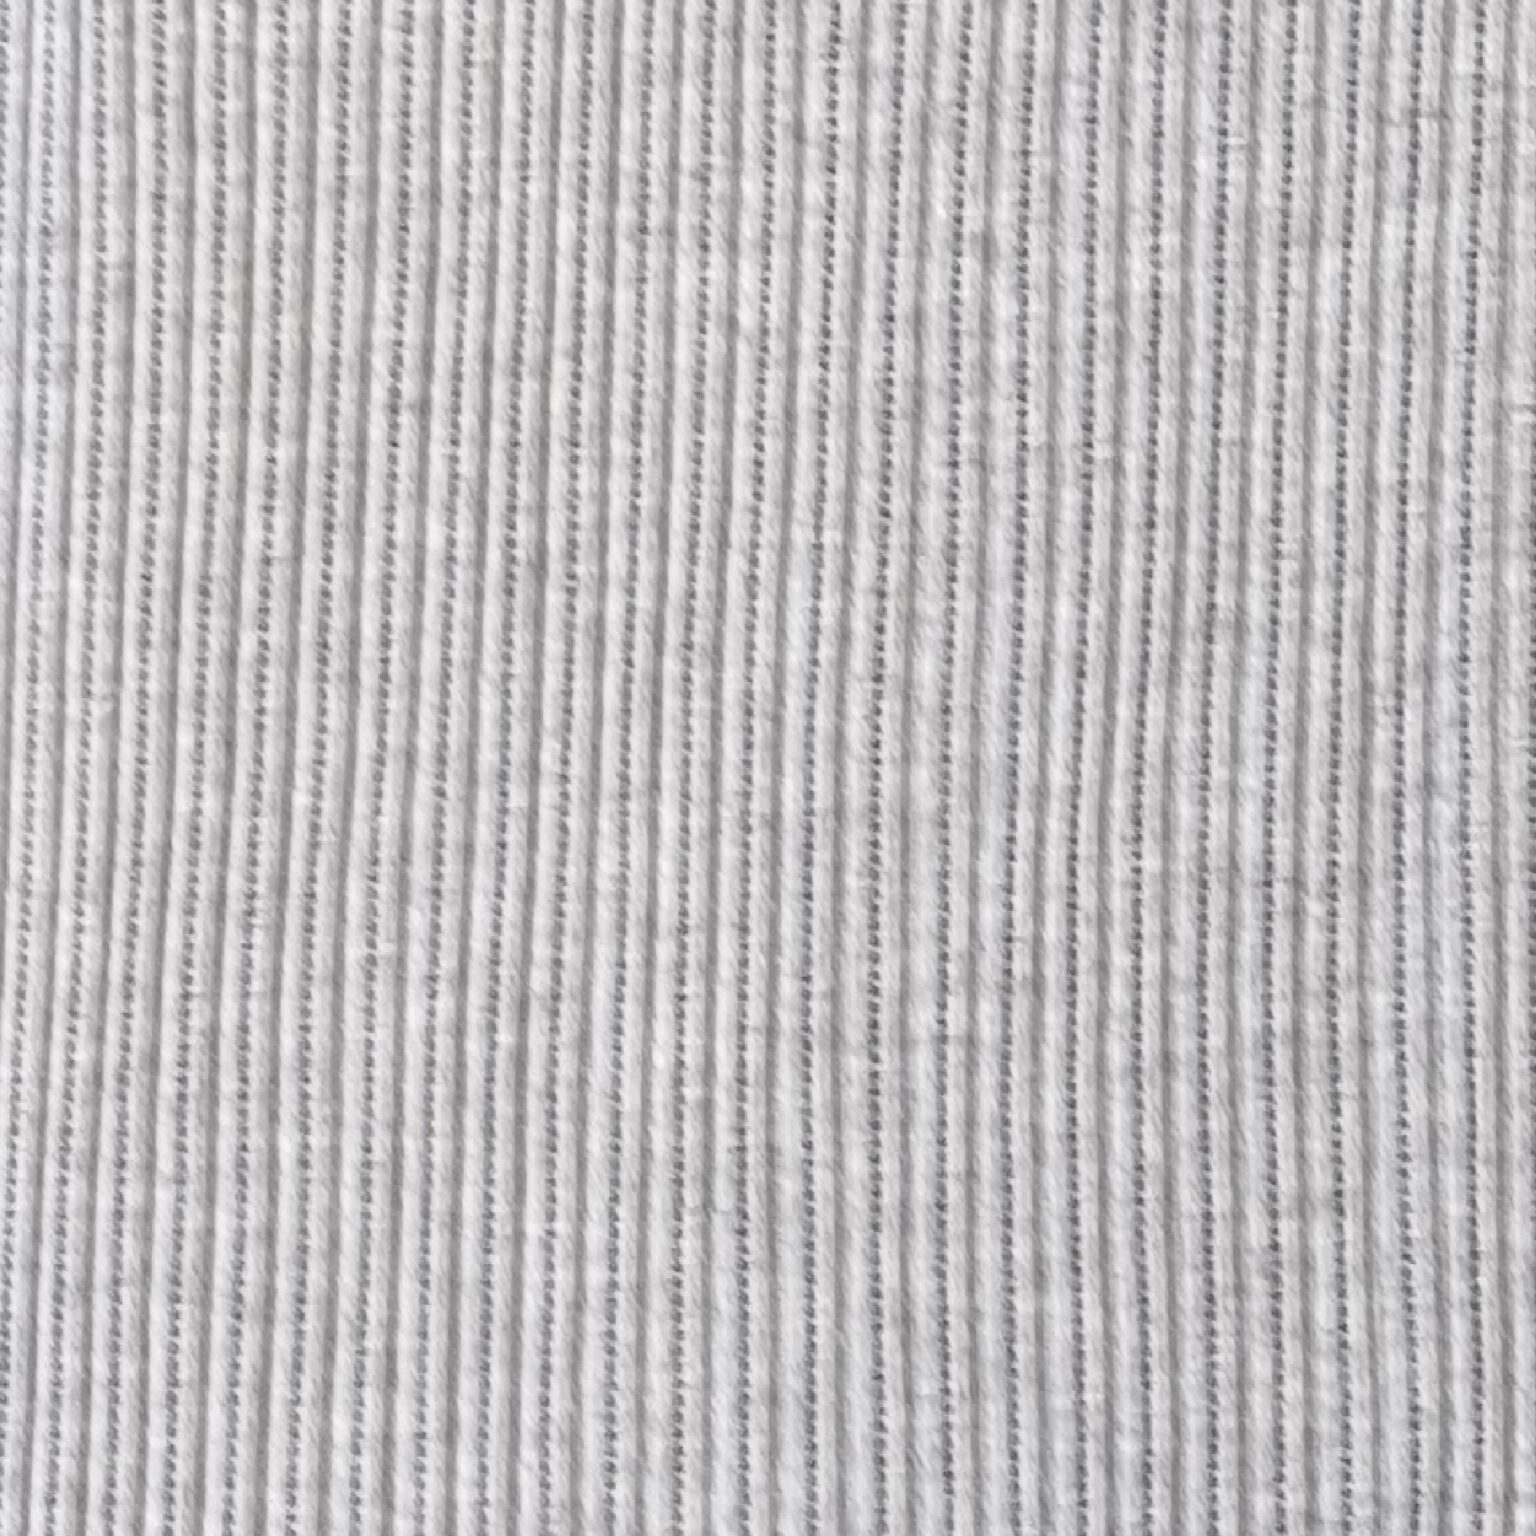 Grey Cable Knit Jersey Fabric | More Sewing